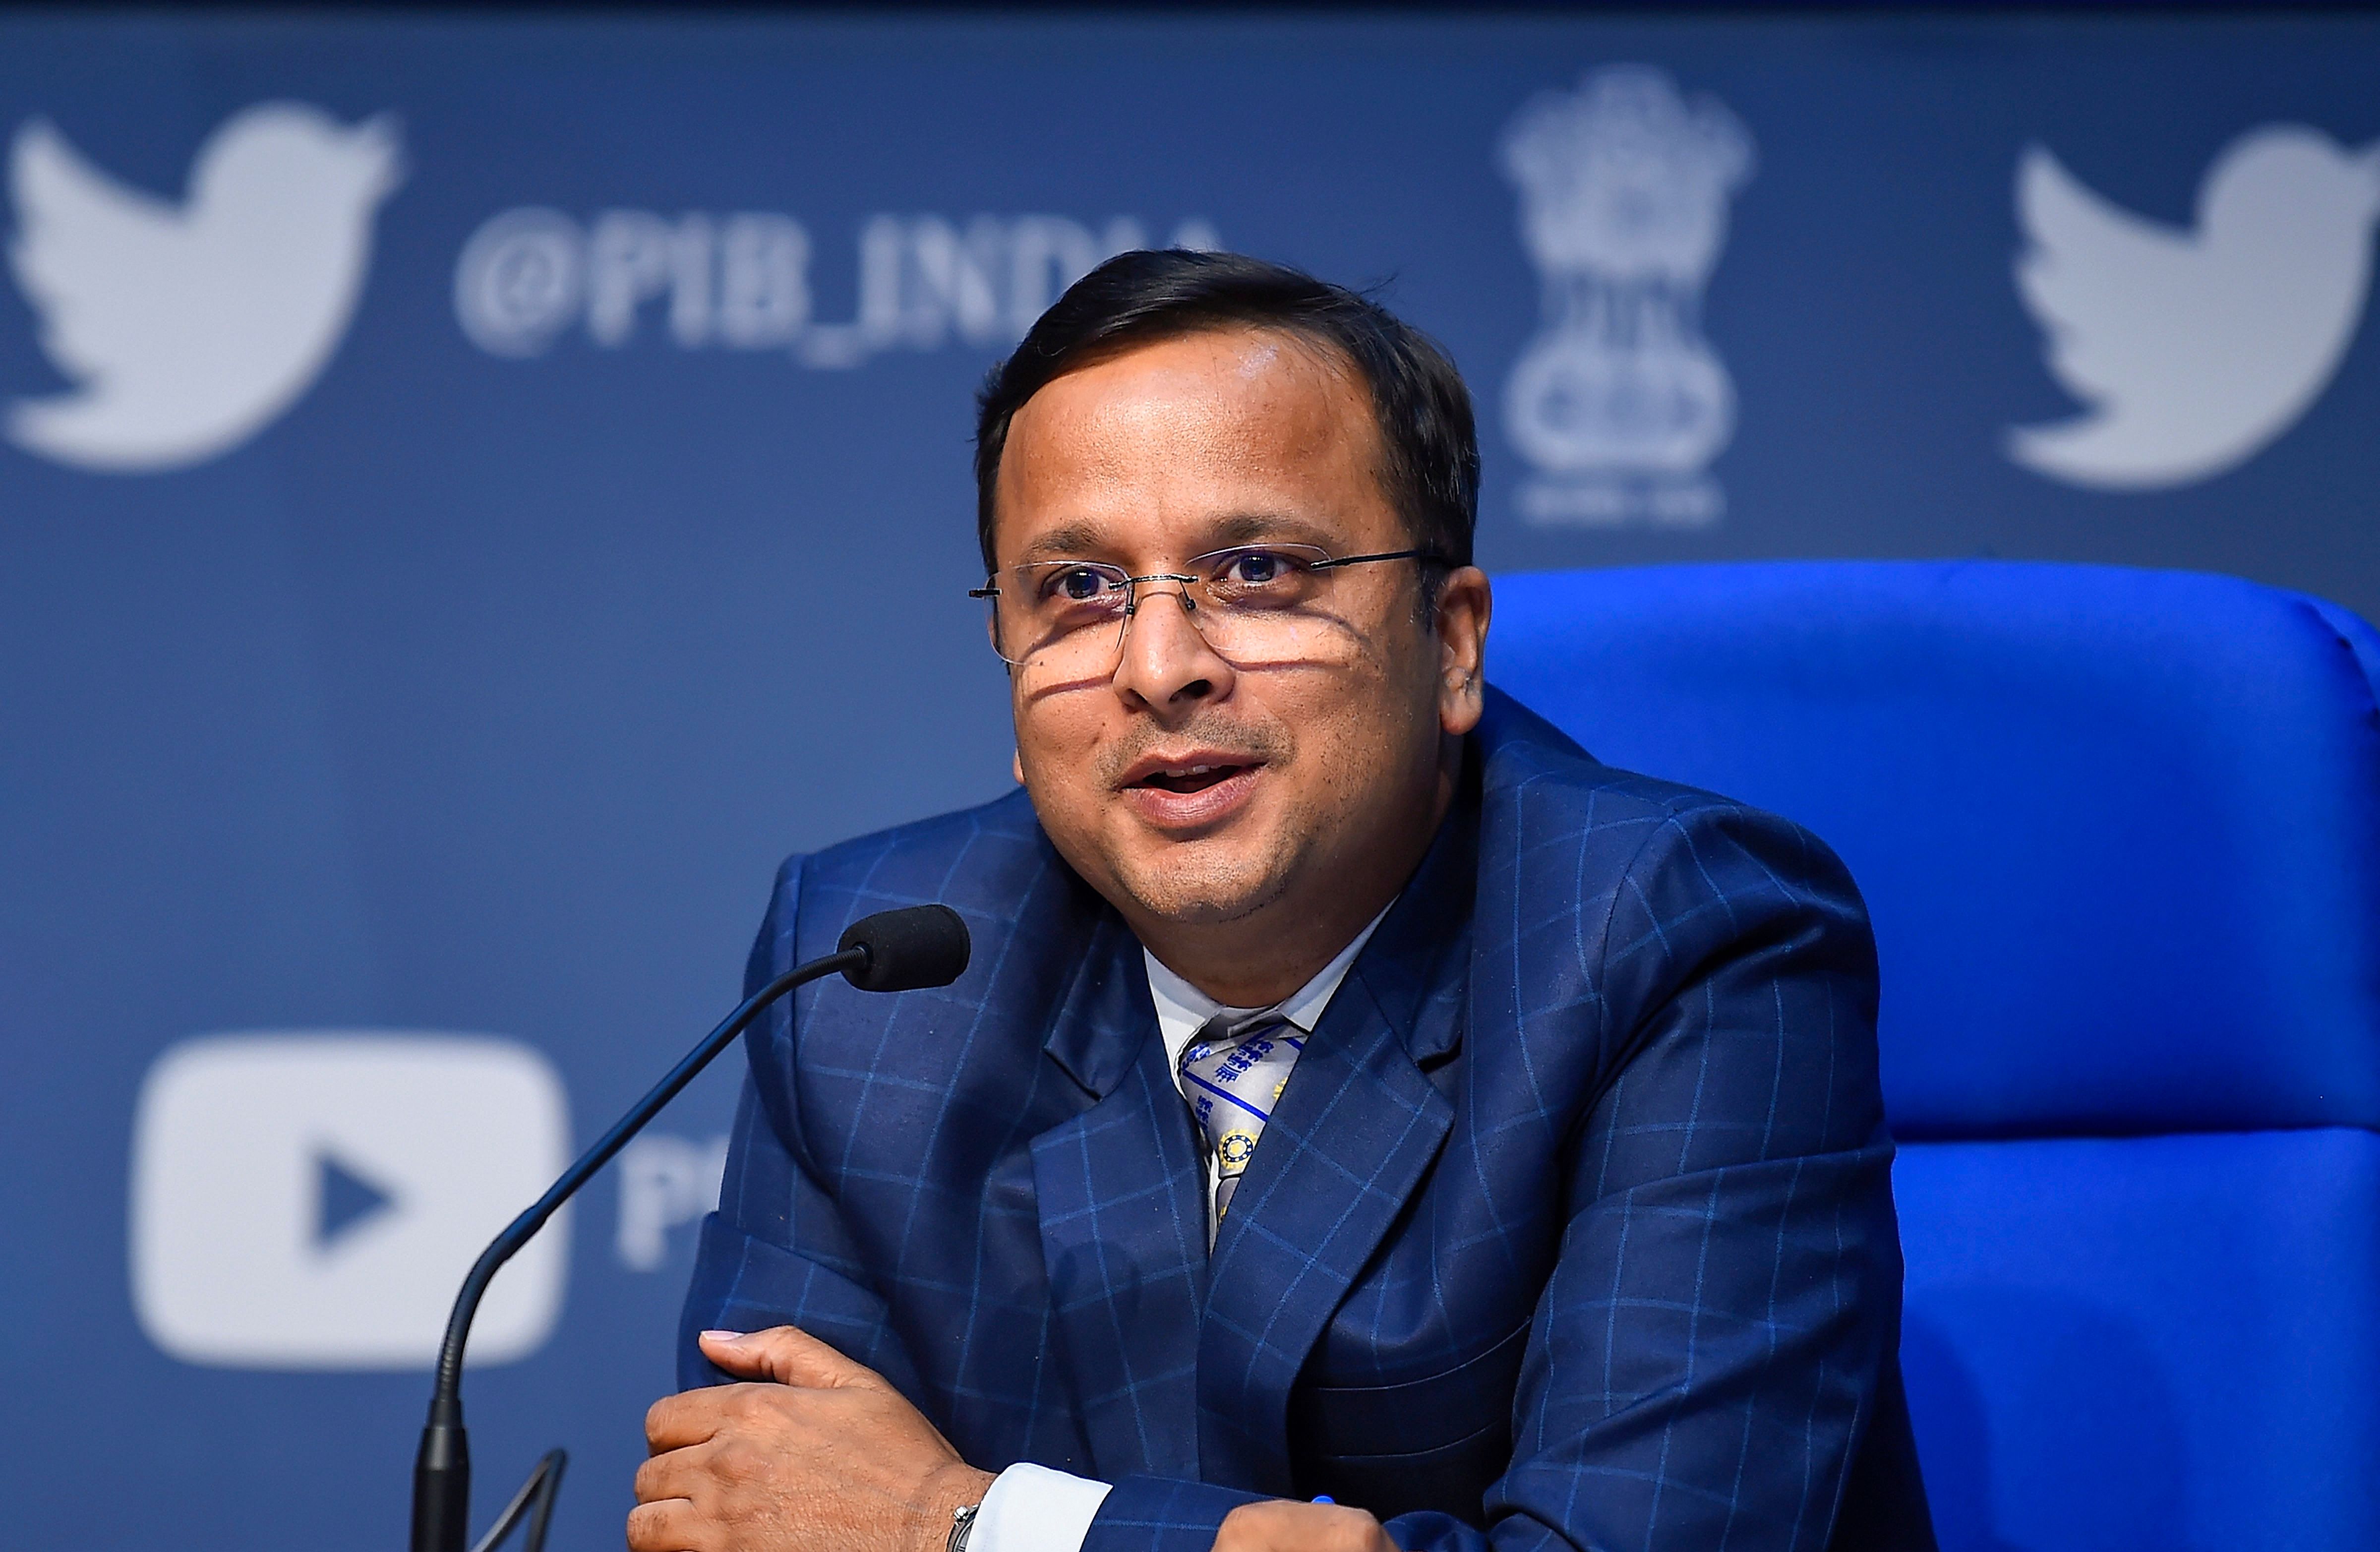 Ministry of Health and Family Welfare Joint Secretary Lav Agarwal addresses a press briefing on COVID-19 preparedness and updates, in New Delhi. (PTI Photo)